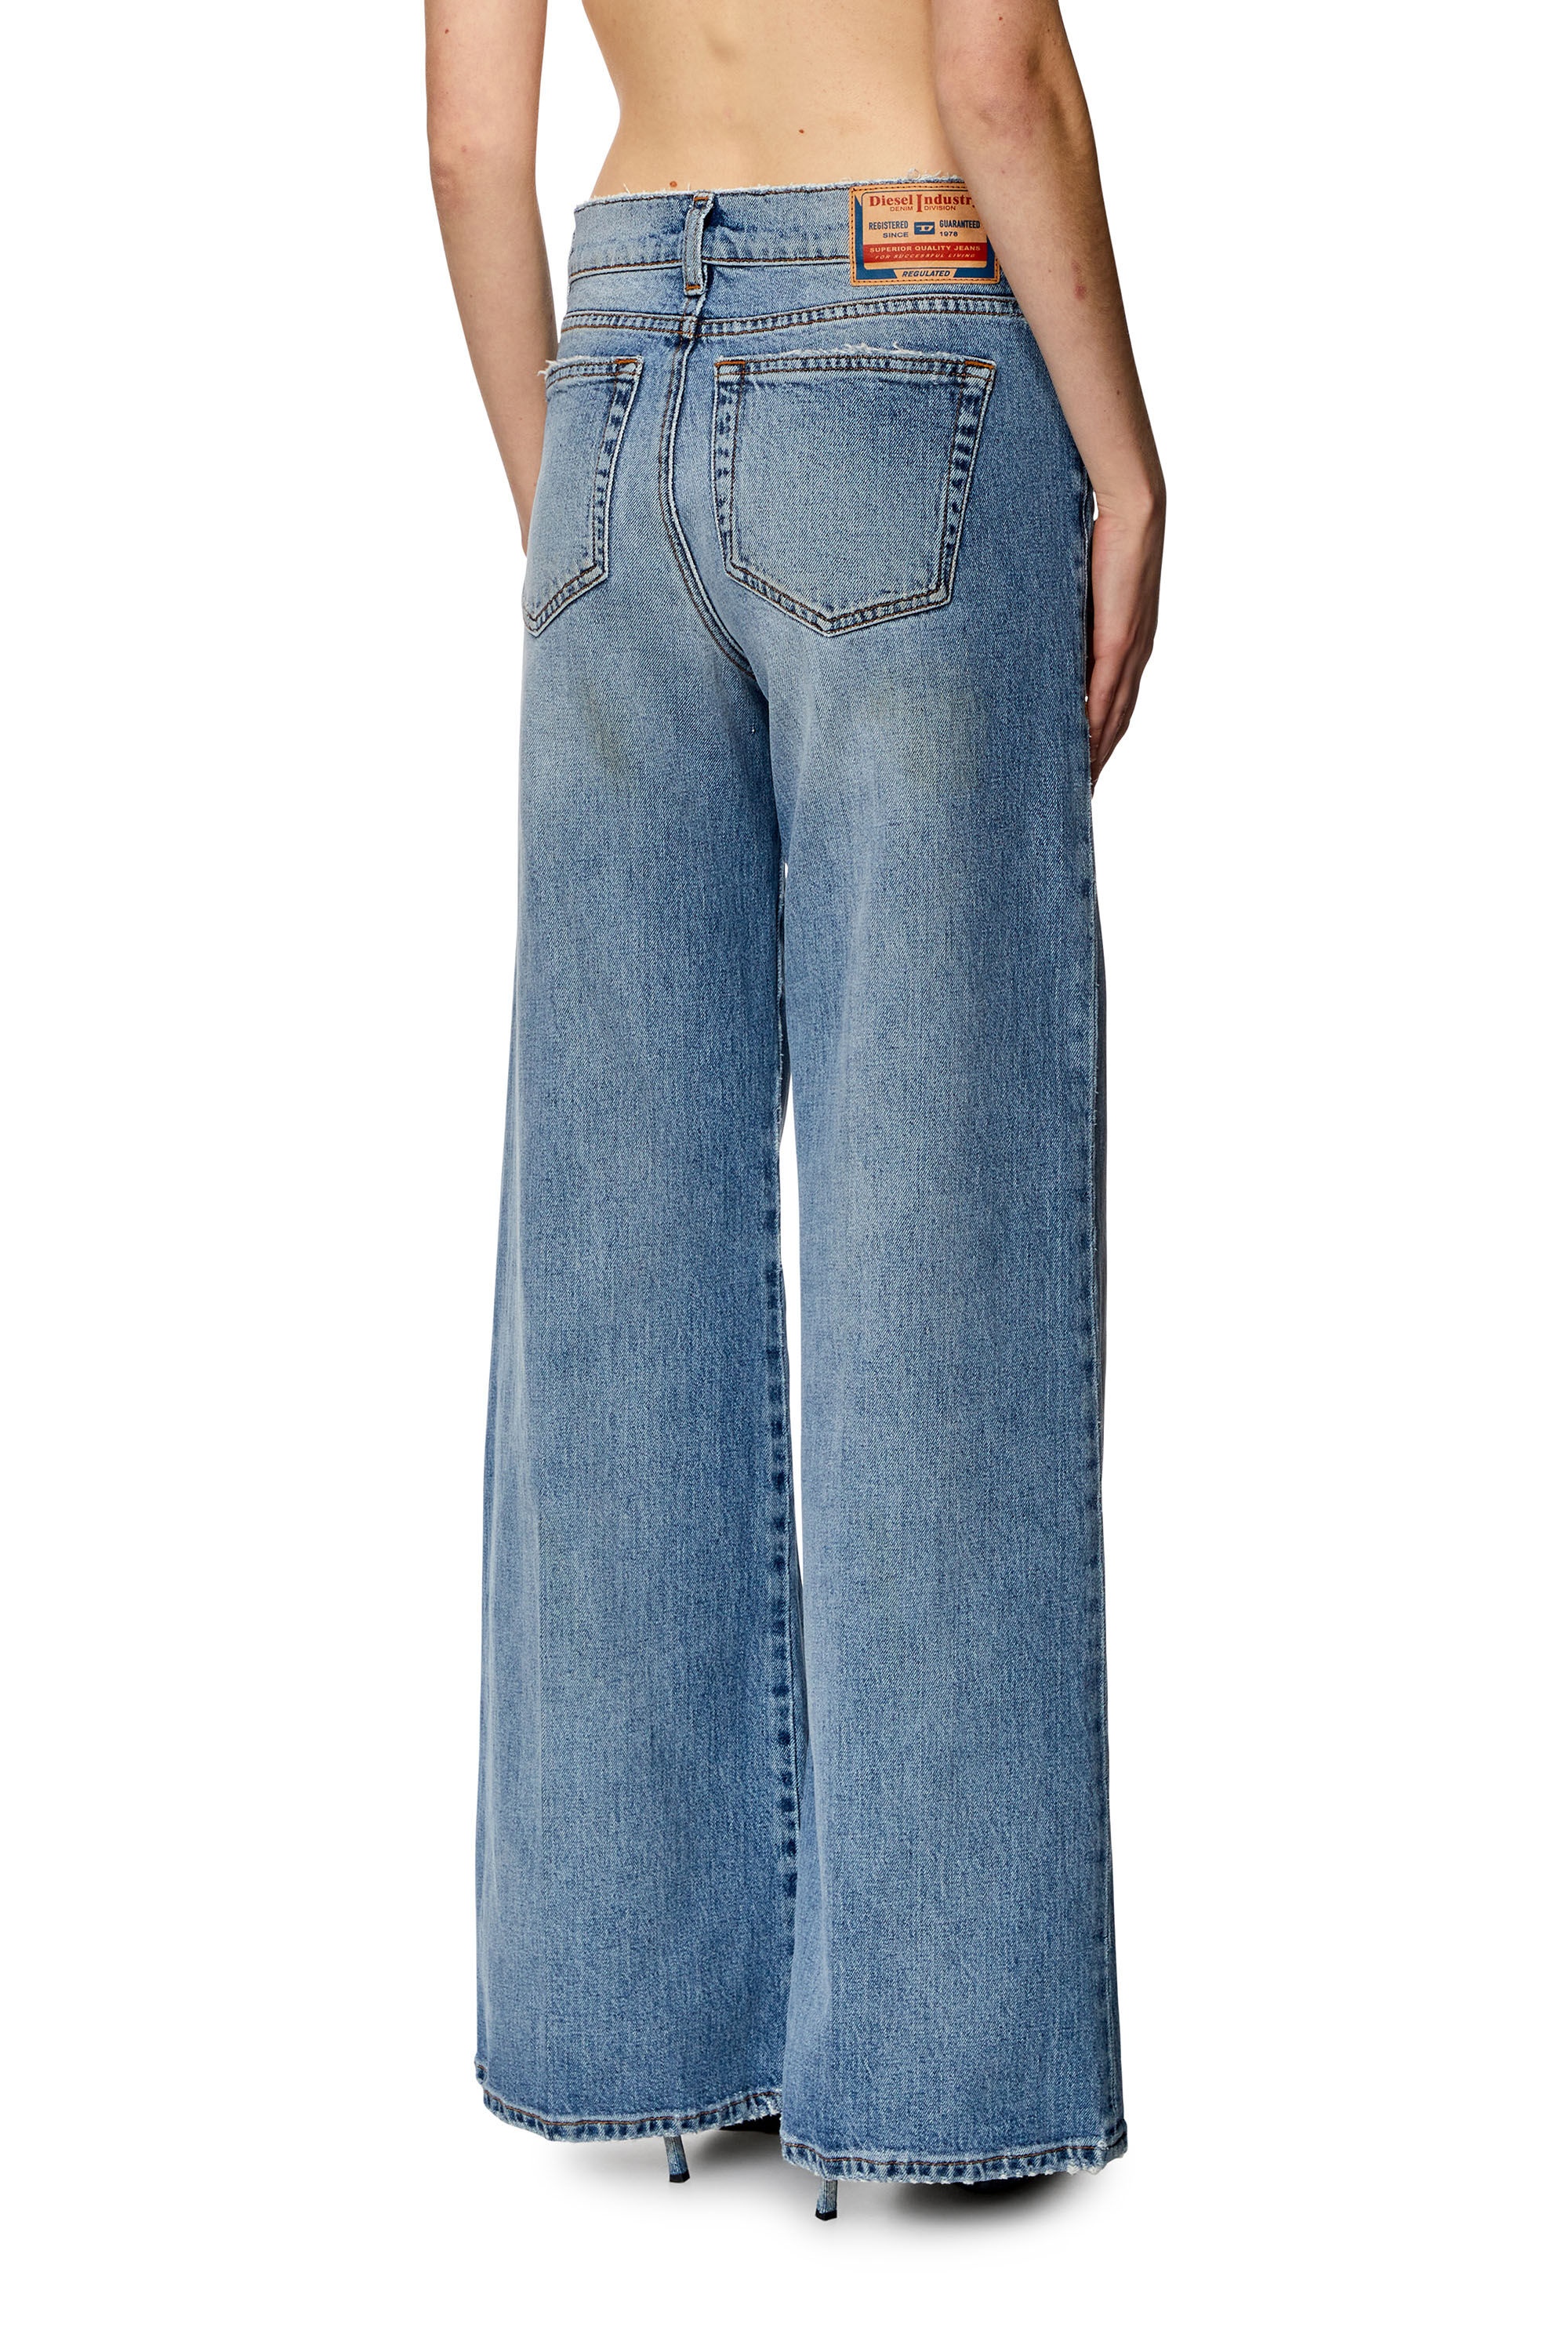 BOOTCUT AND FLARE JEANS 1978 D-AKEMI 0DQAD - 5